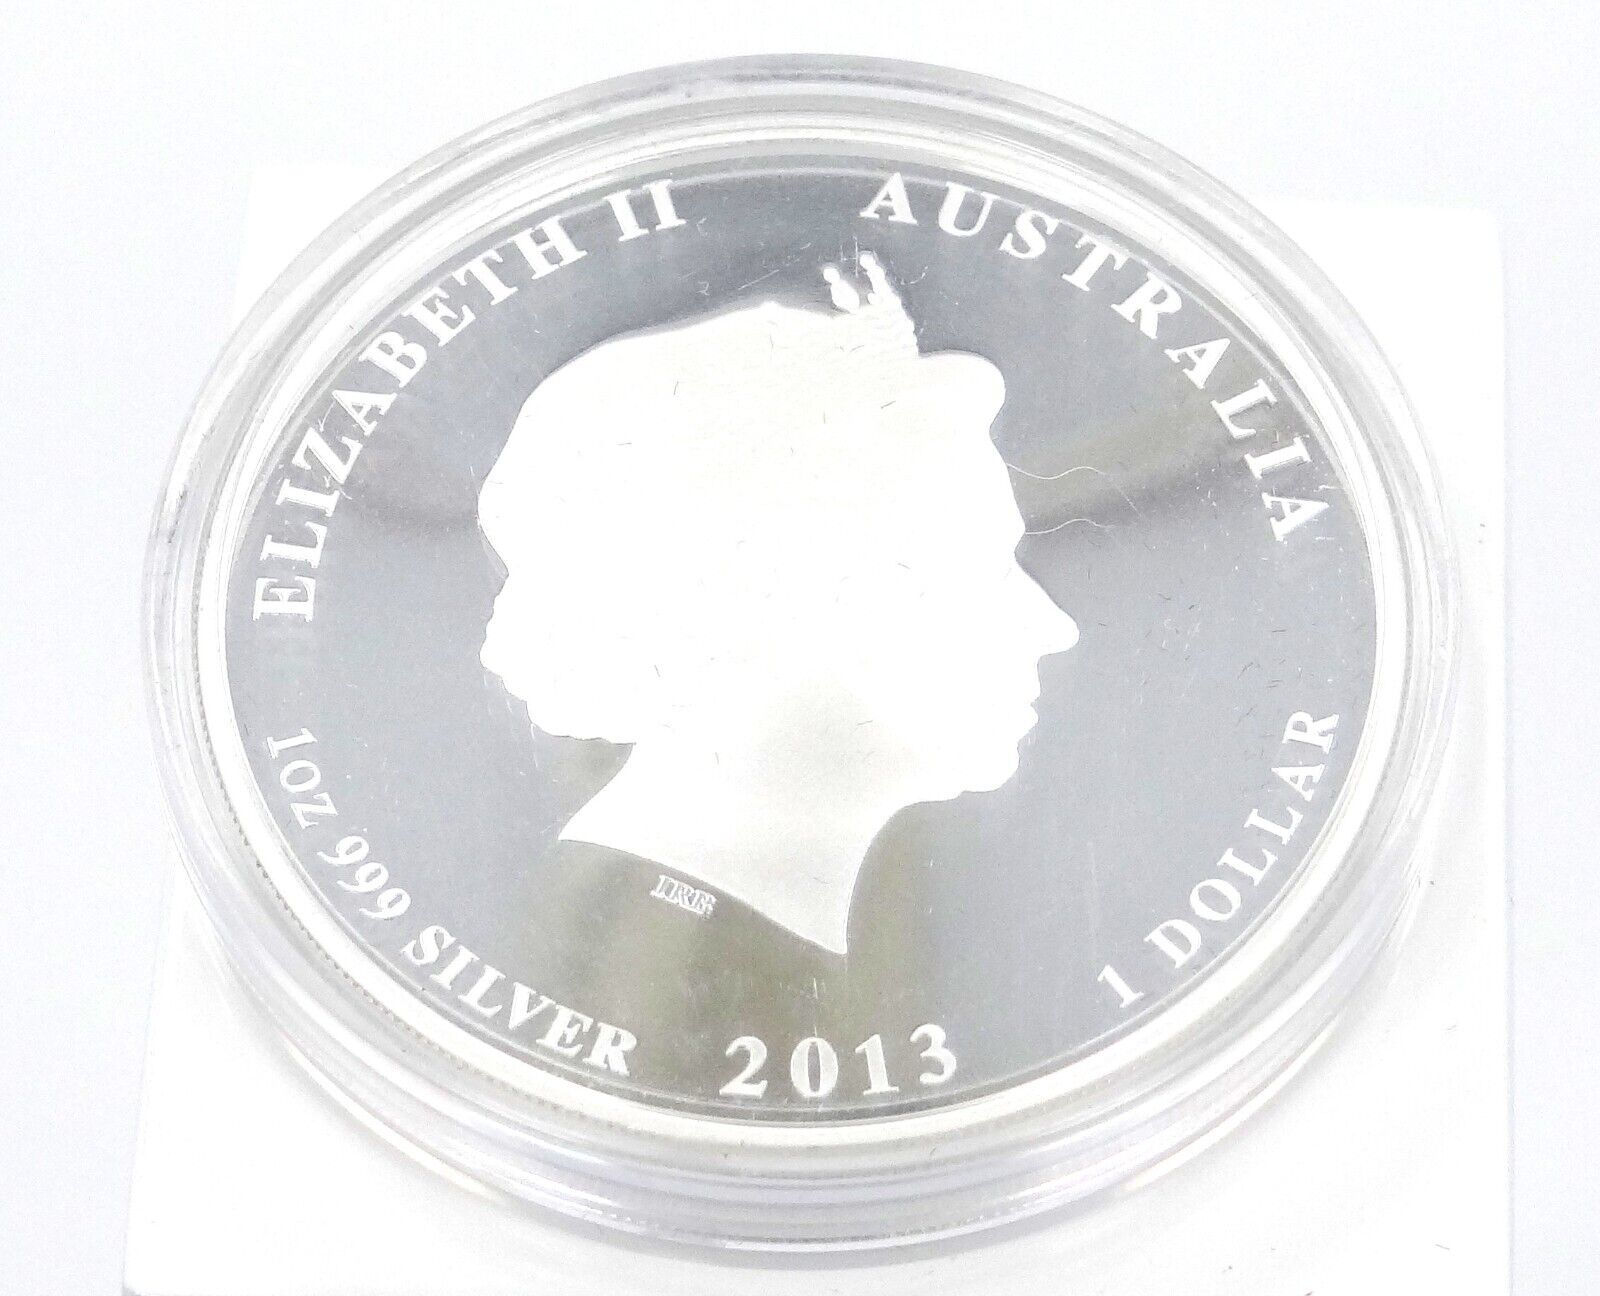 1 Oz Silver Coin 2013 $0.50 Australian Lunar Series II Year of The Snake Color-classypw.com-1